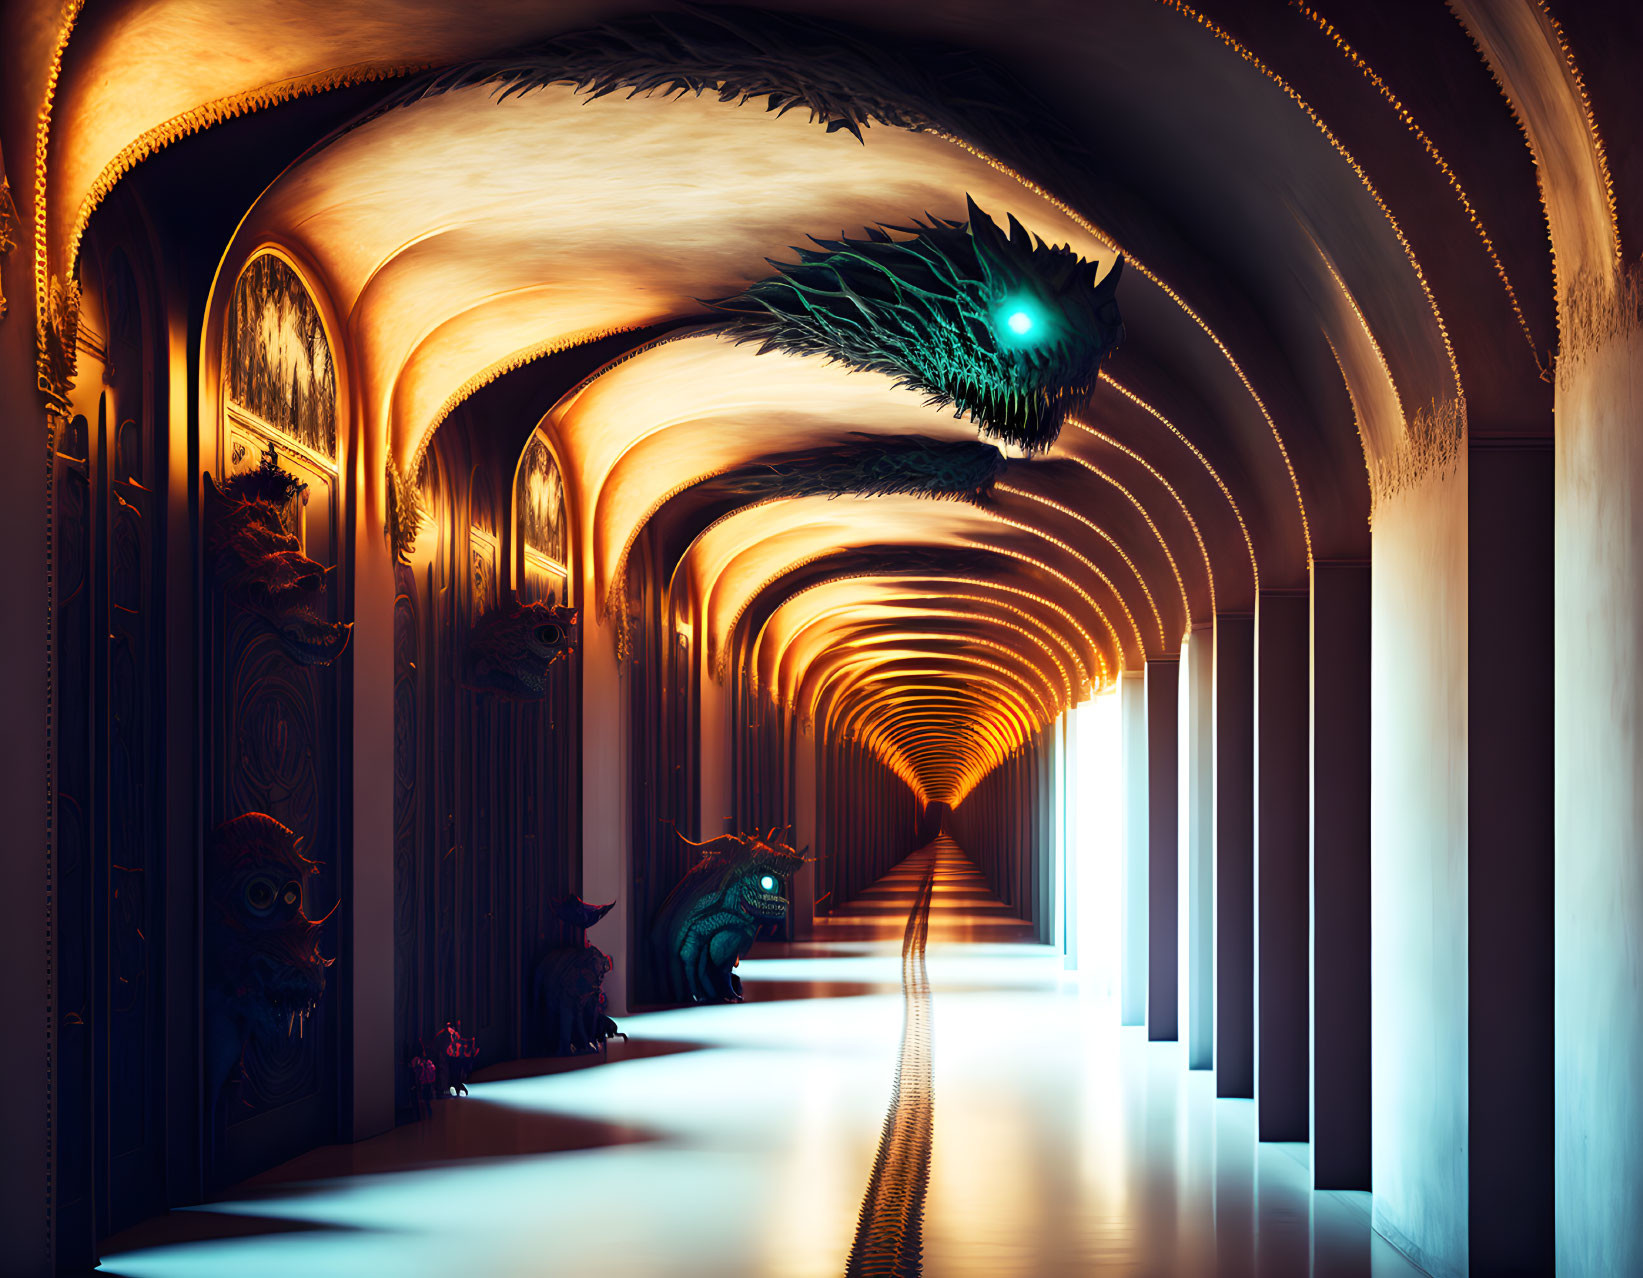 Elongated corridor with golden arches and dragon sculptures